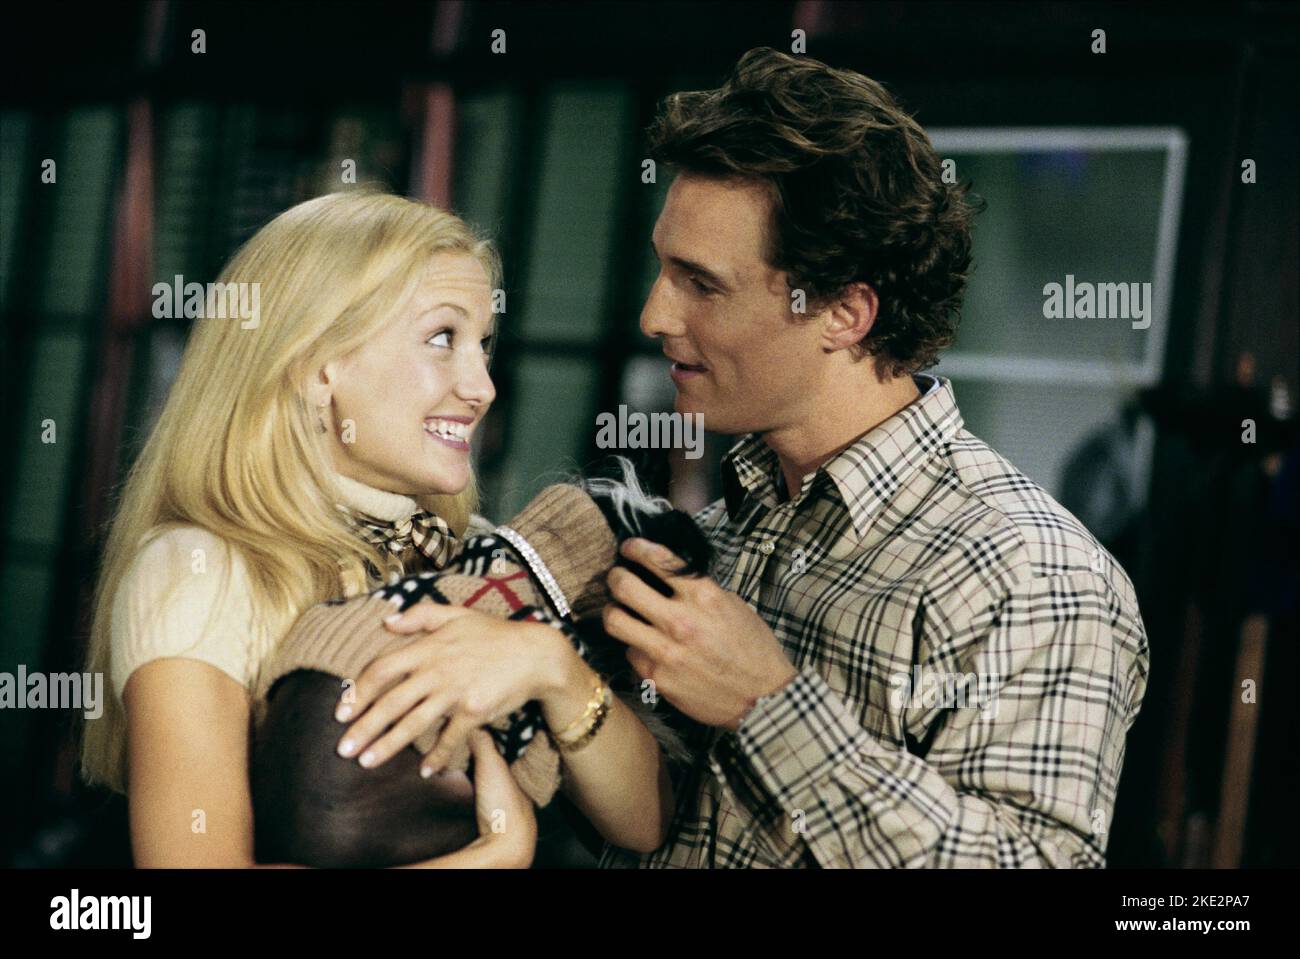 HOW TO LOSE A GUY IN 10 DAYS, KATE HUDSON, MATTHEW MCCONAUGHEY, 2003 Stock Photo